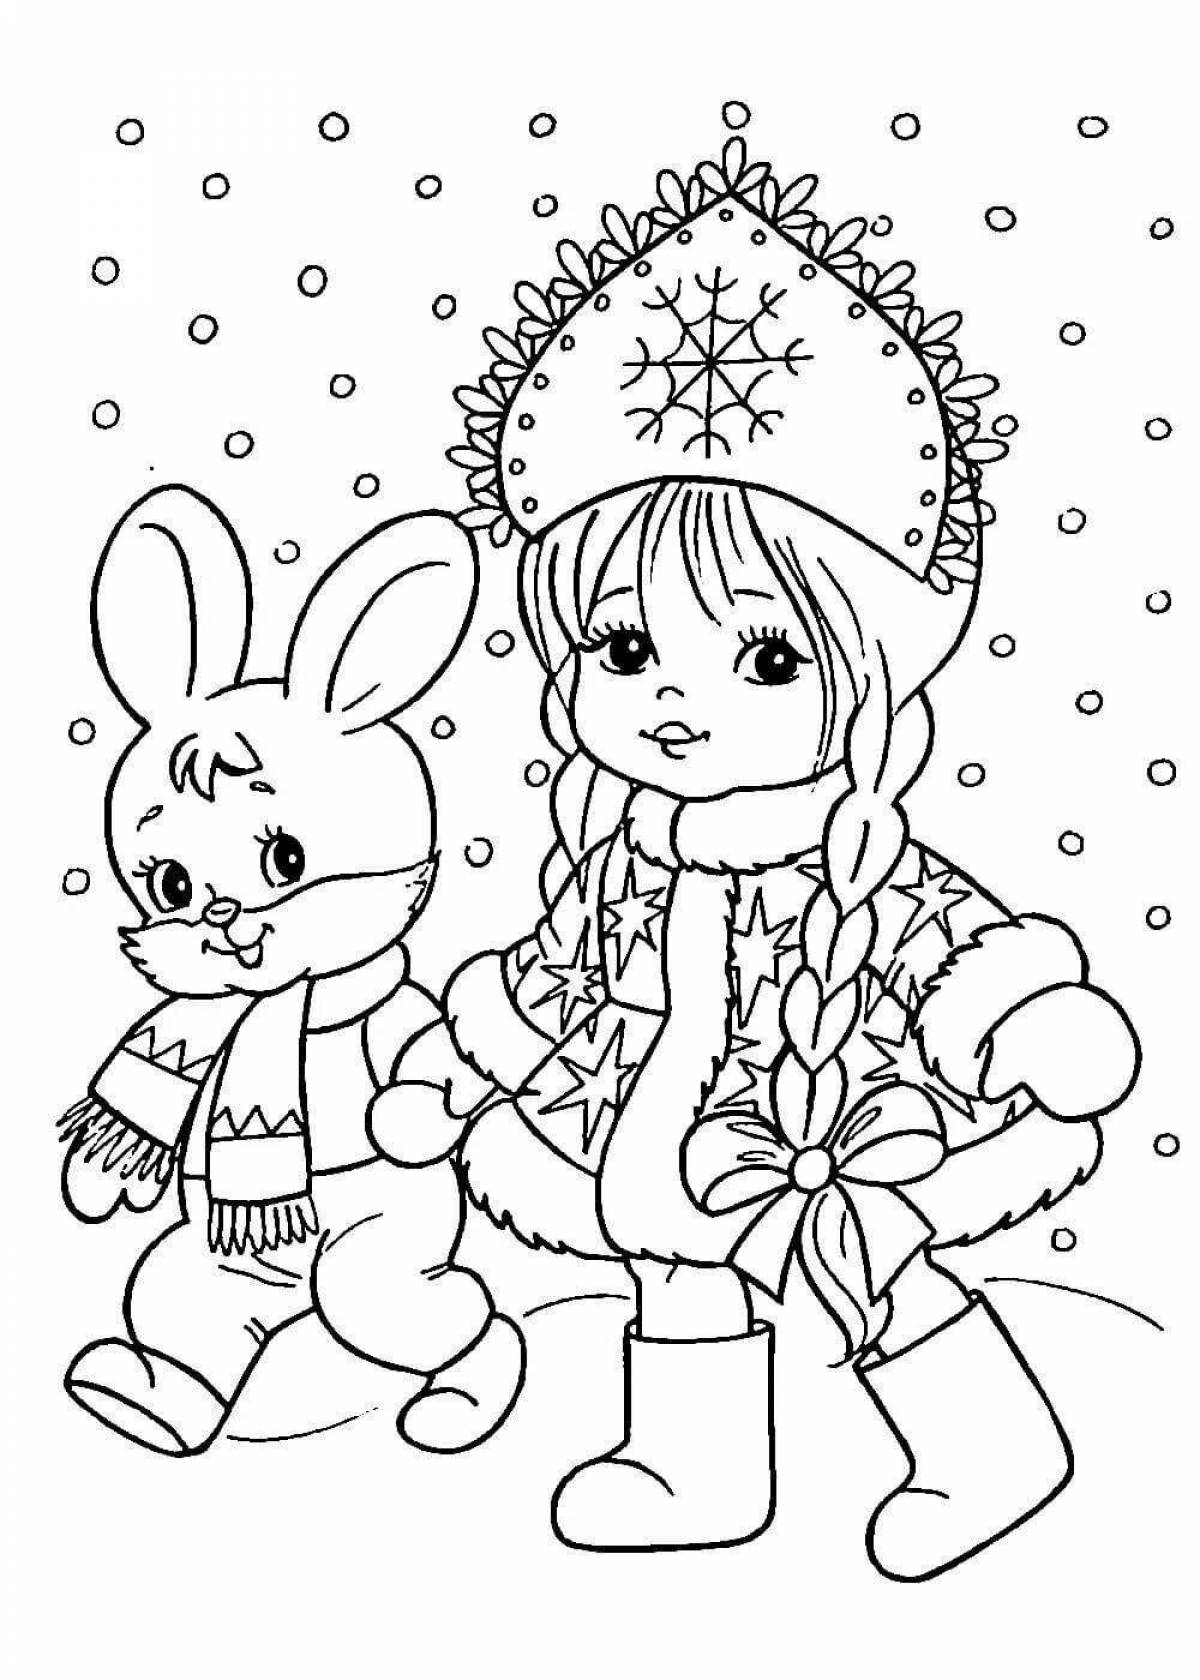 Bright Snow Maiden with a Christmas tree